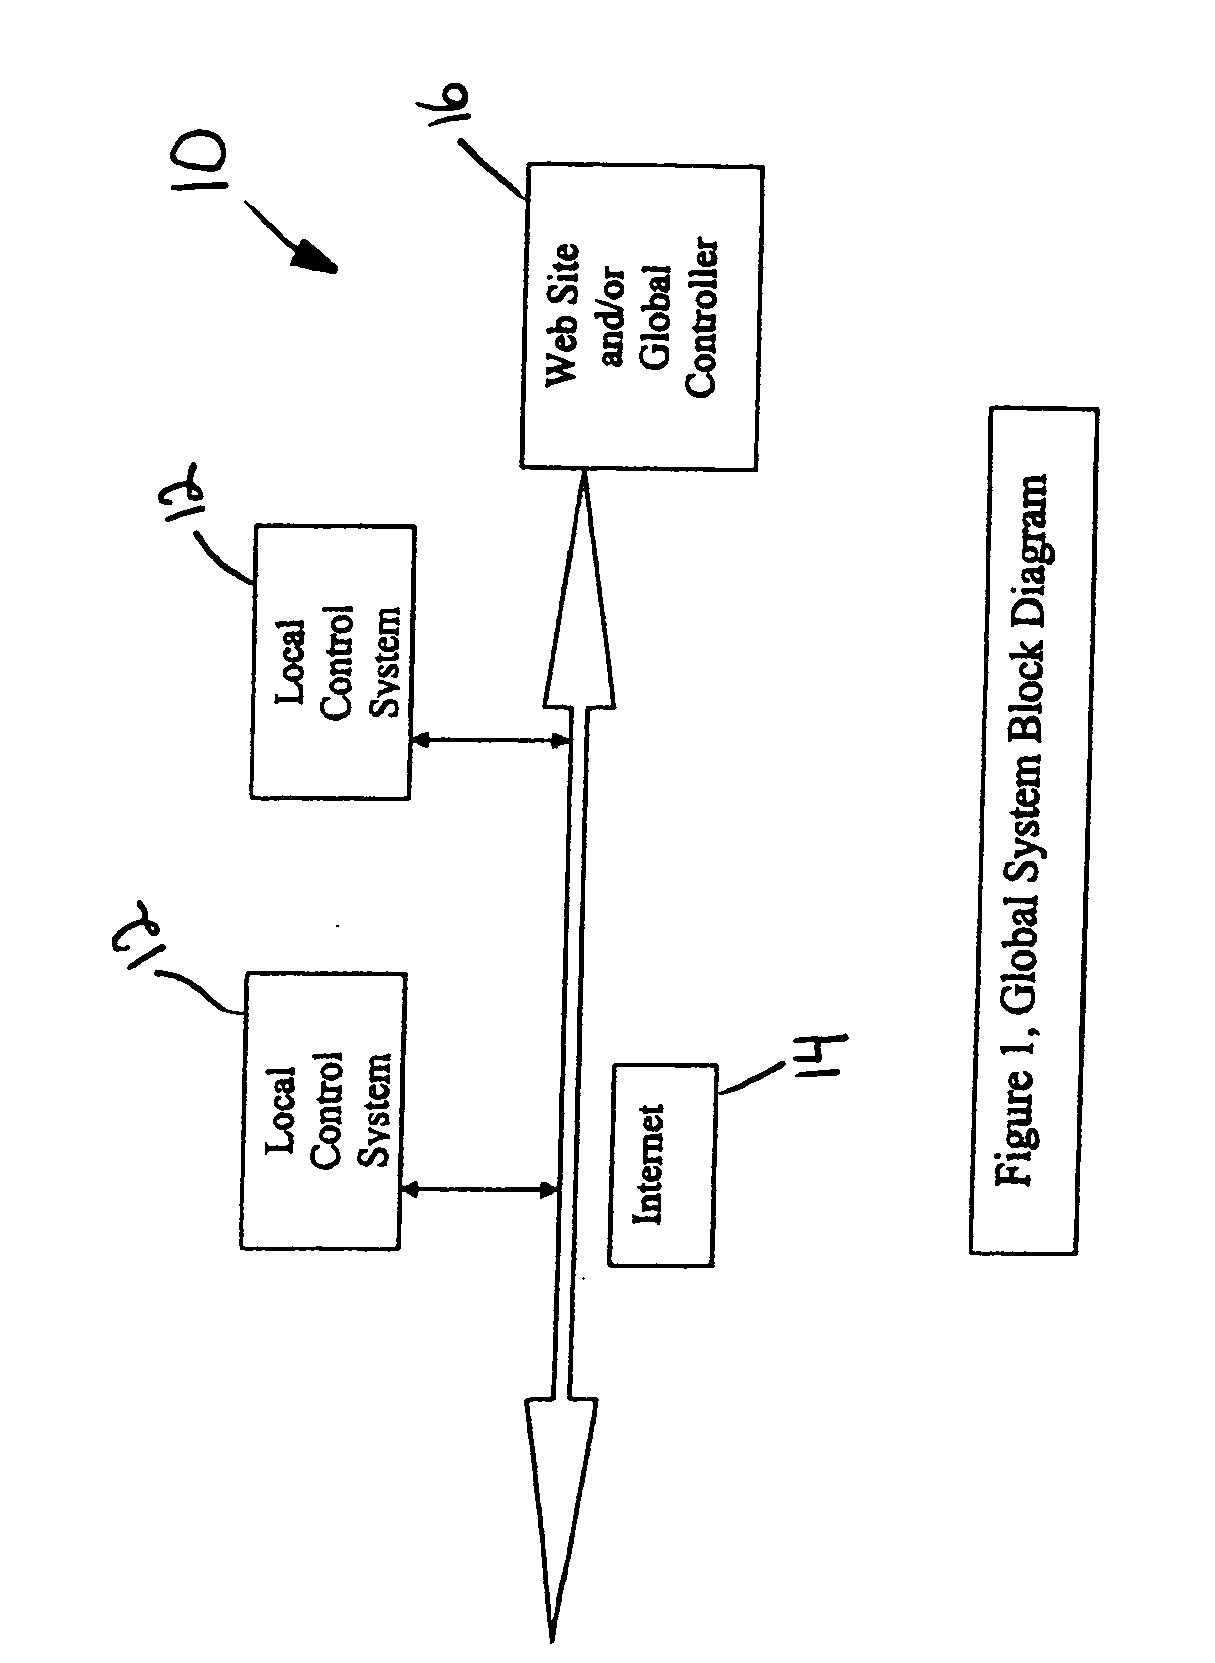 RFID systems and methods employing infrared localization